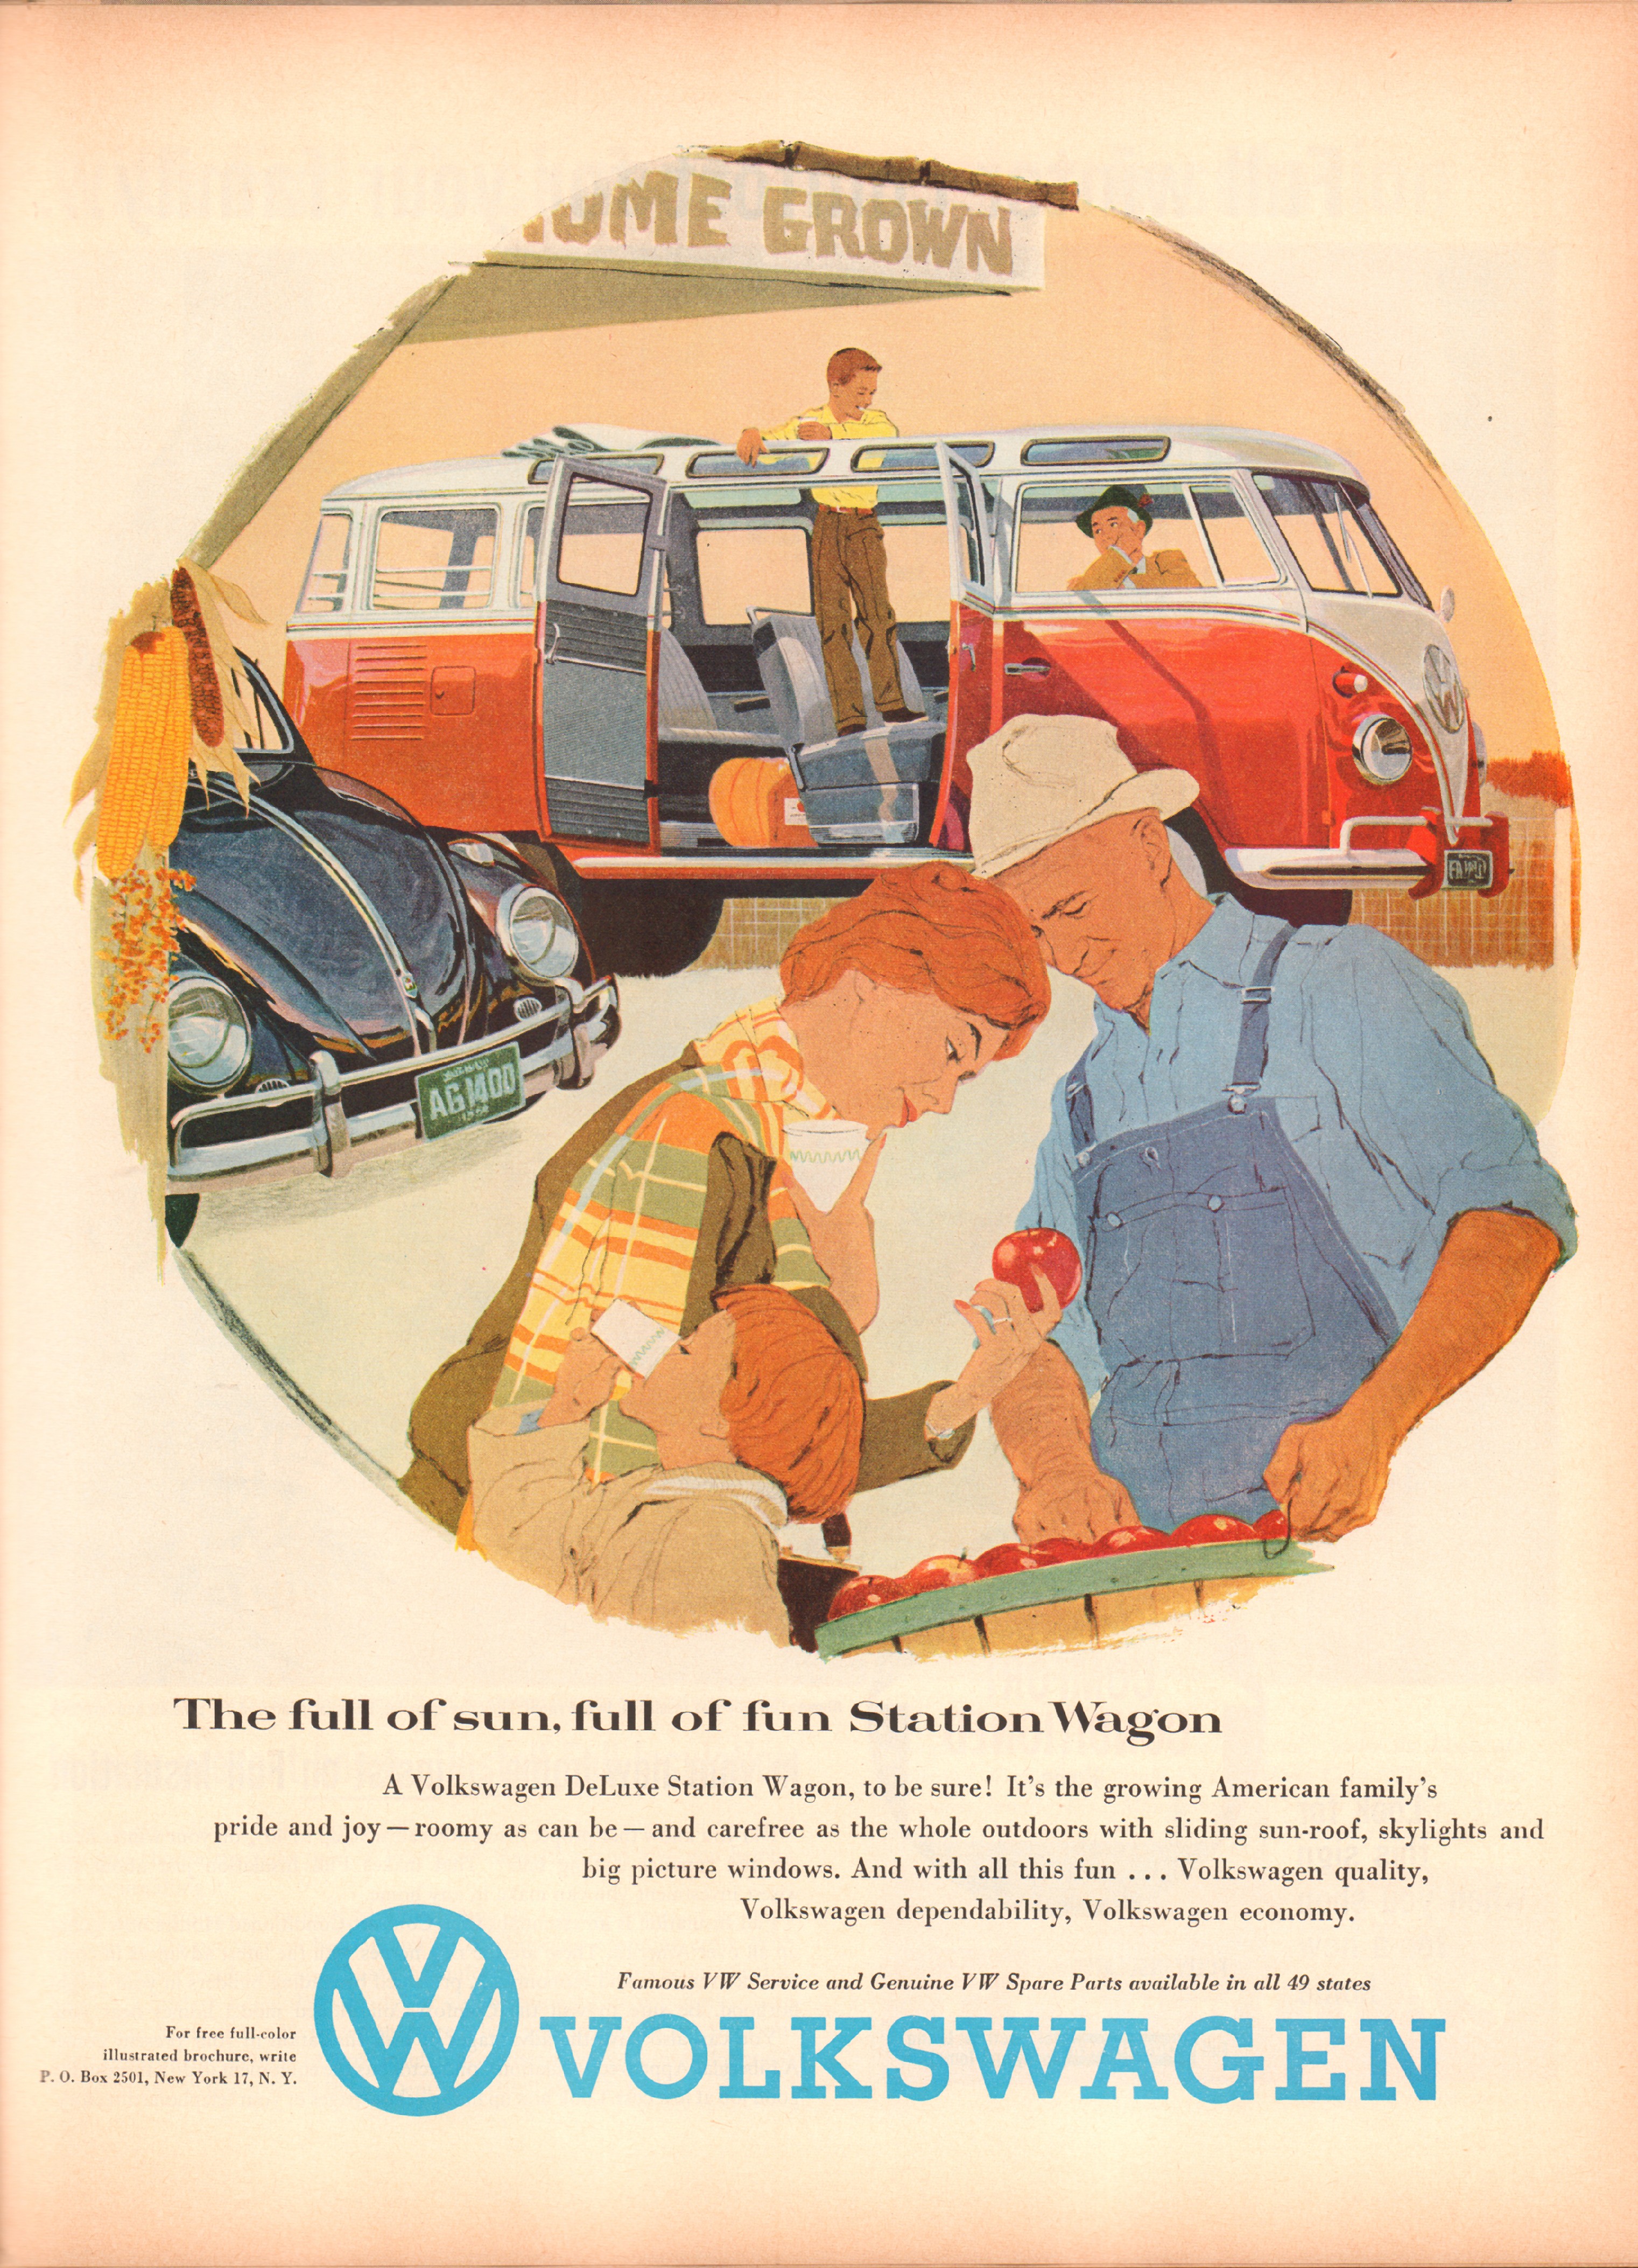 1958 Volkswagen DeLuxe Station Wagon - published in Life - November 10, 1958